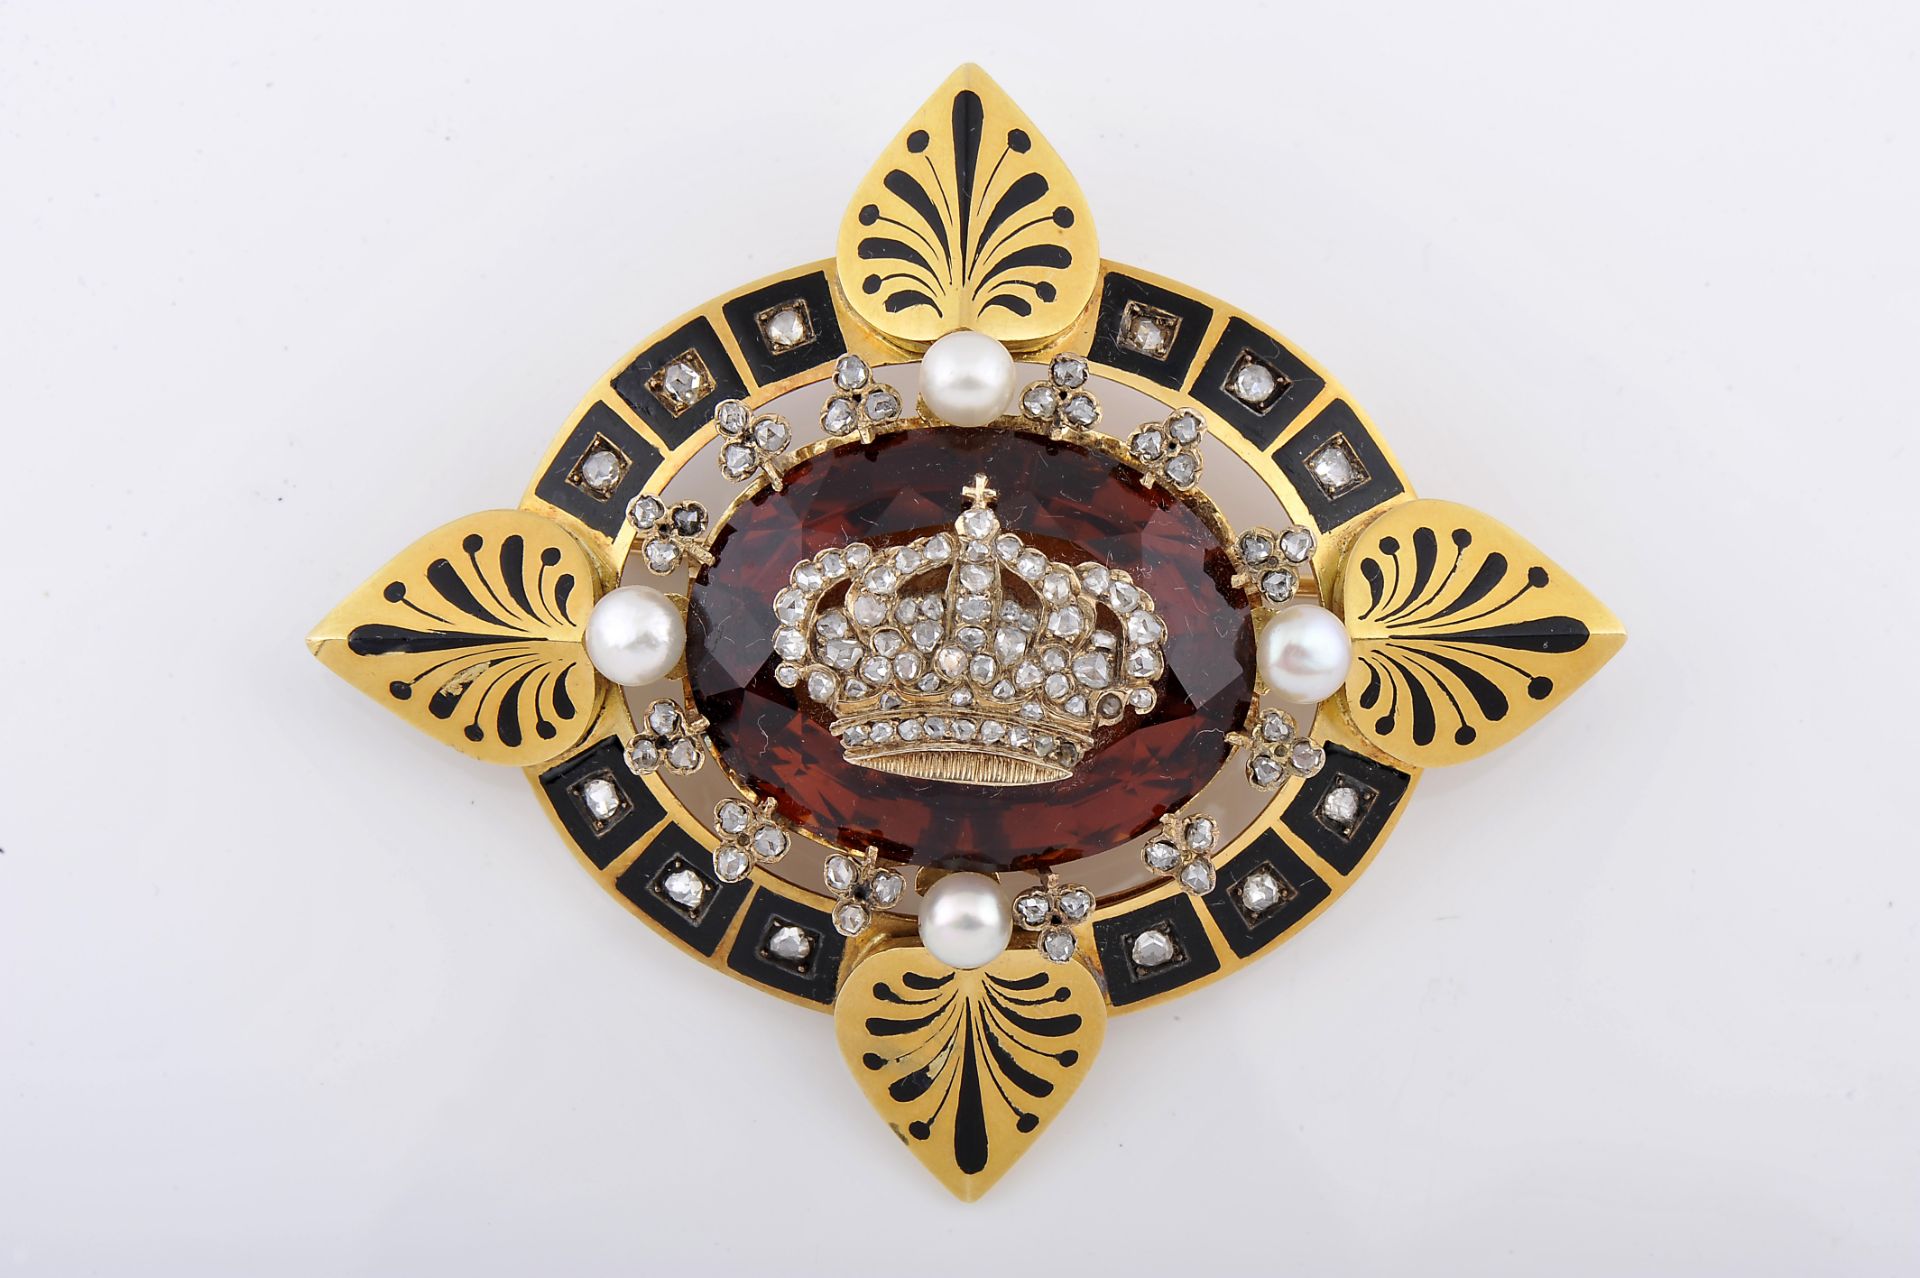 A brooch with a royal Crown